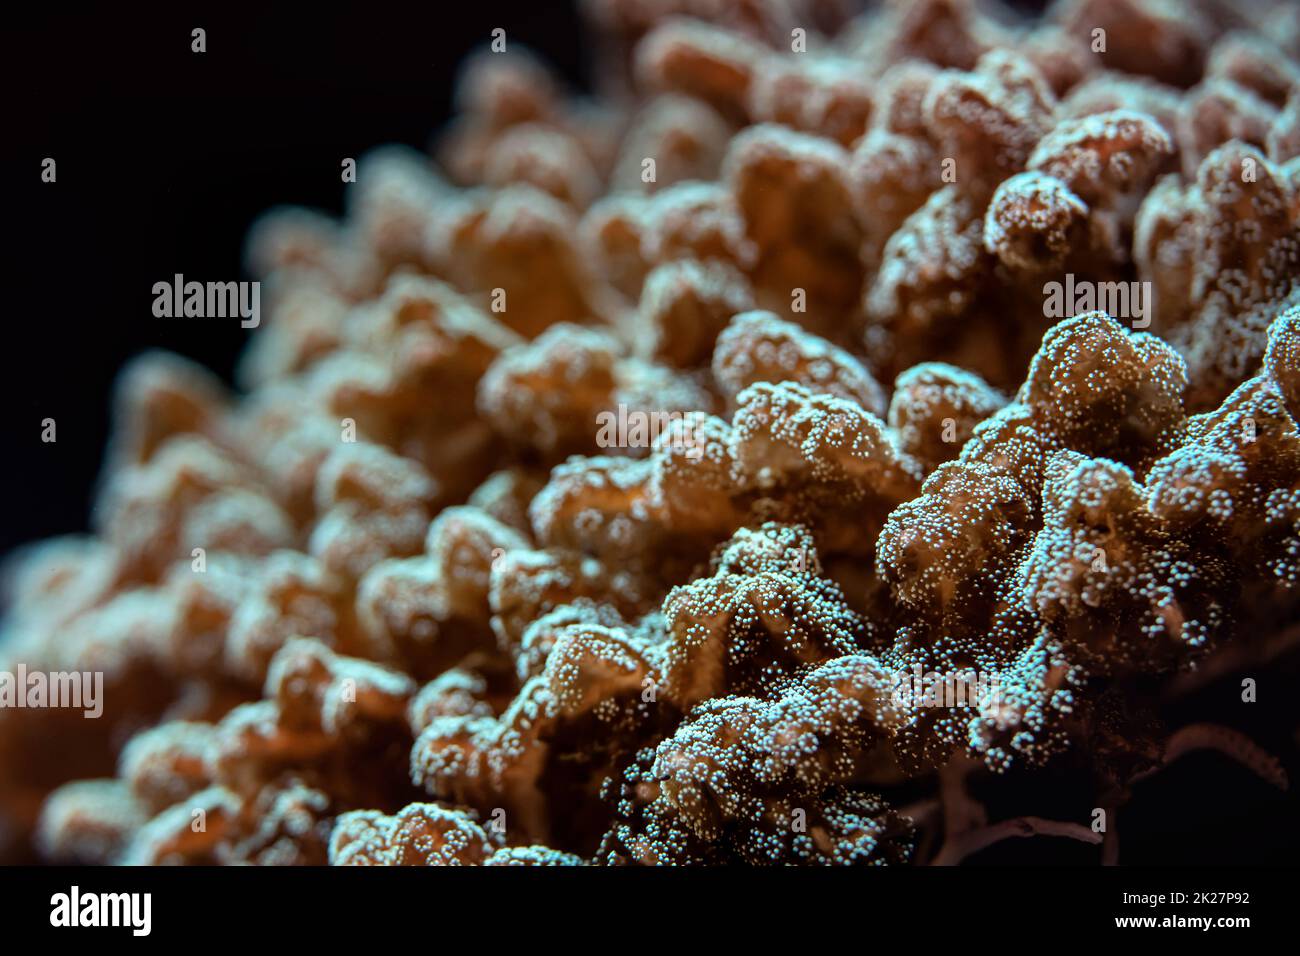 Underwater photo, close up of coral emitting fluorescent light. Abstract marine background Stock Photo